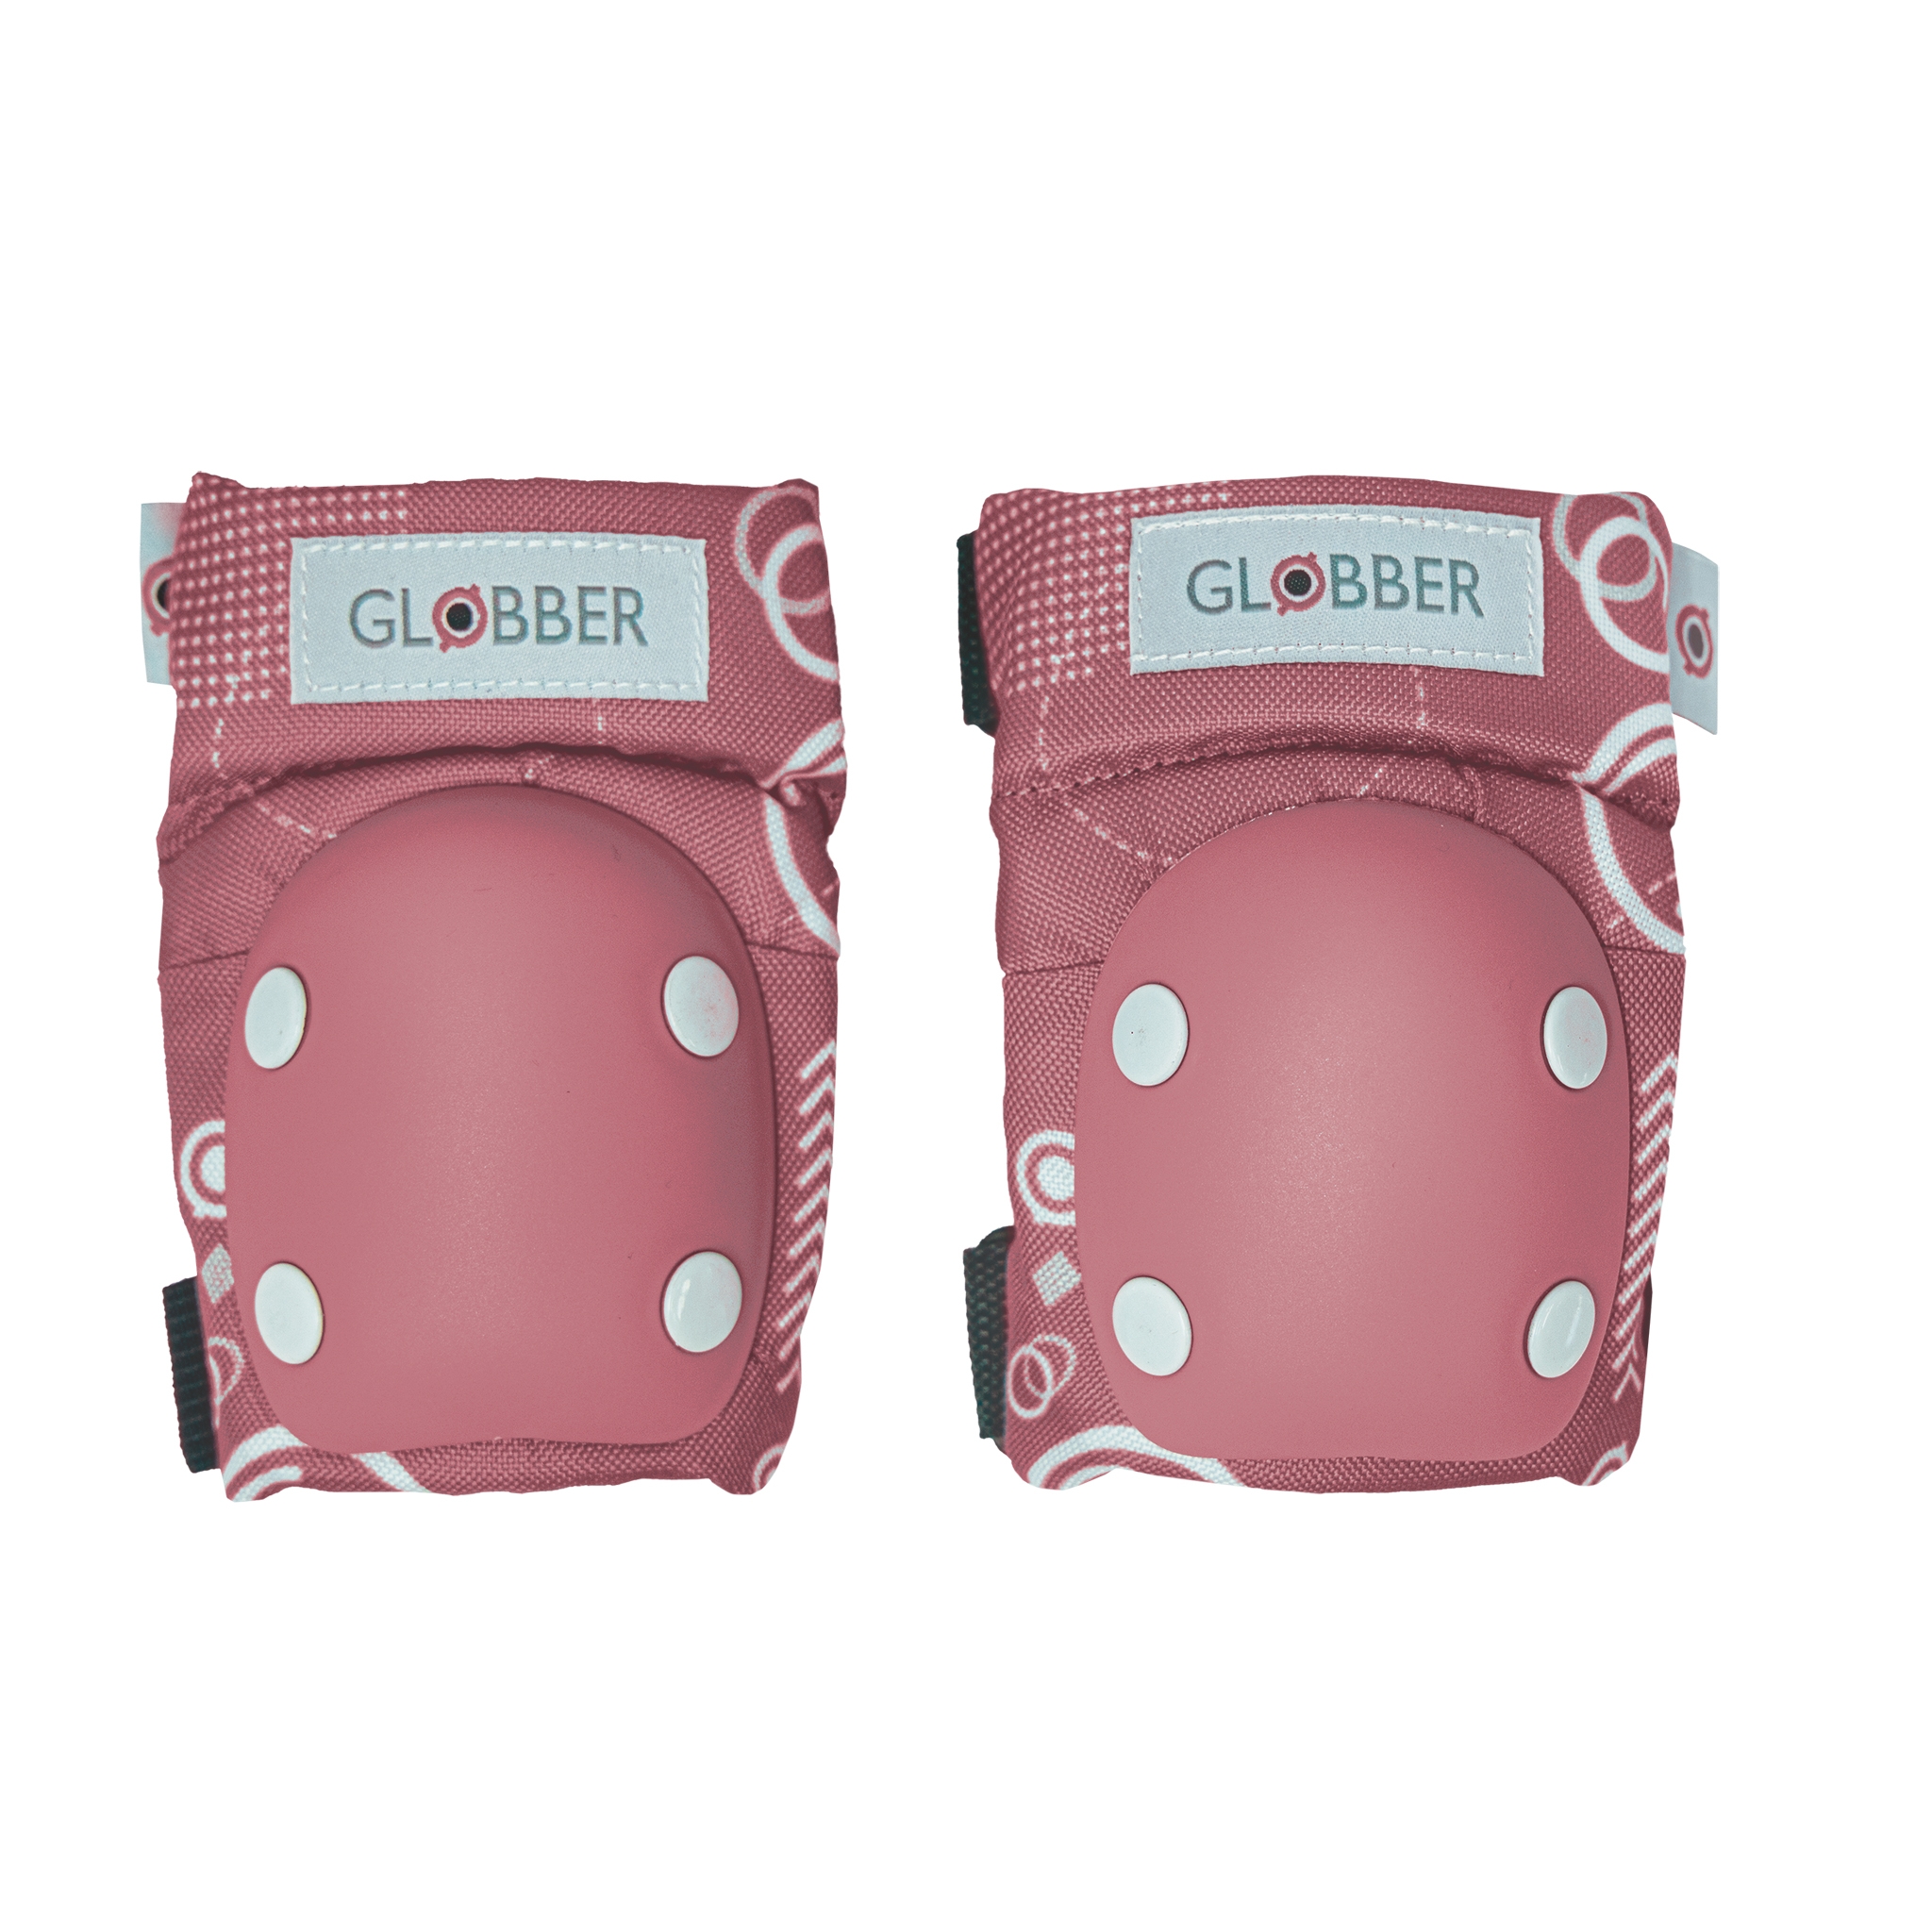 Printed-elbow-and-knee-pads-for-kids 0